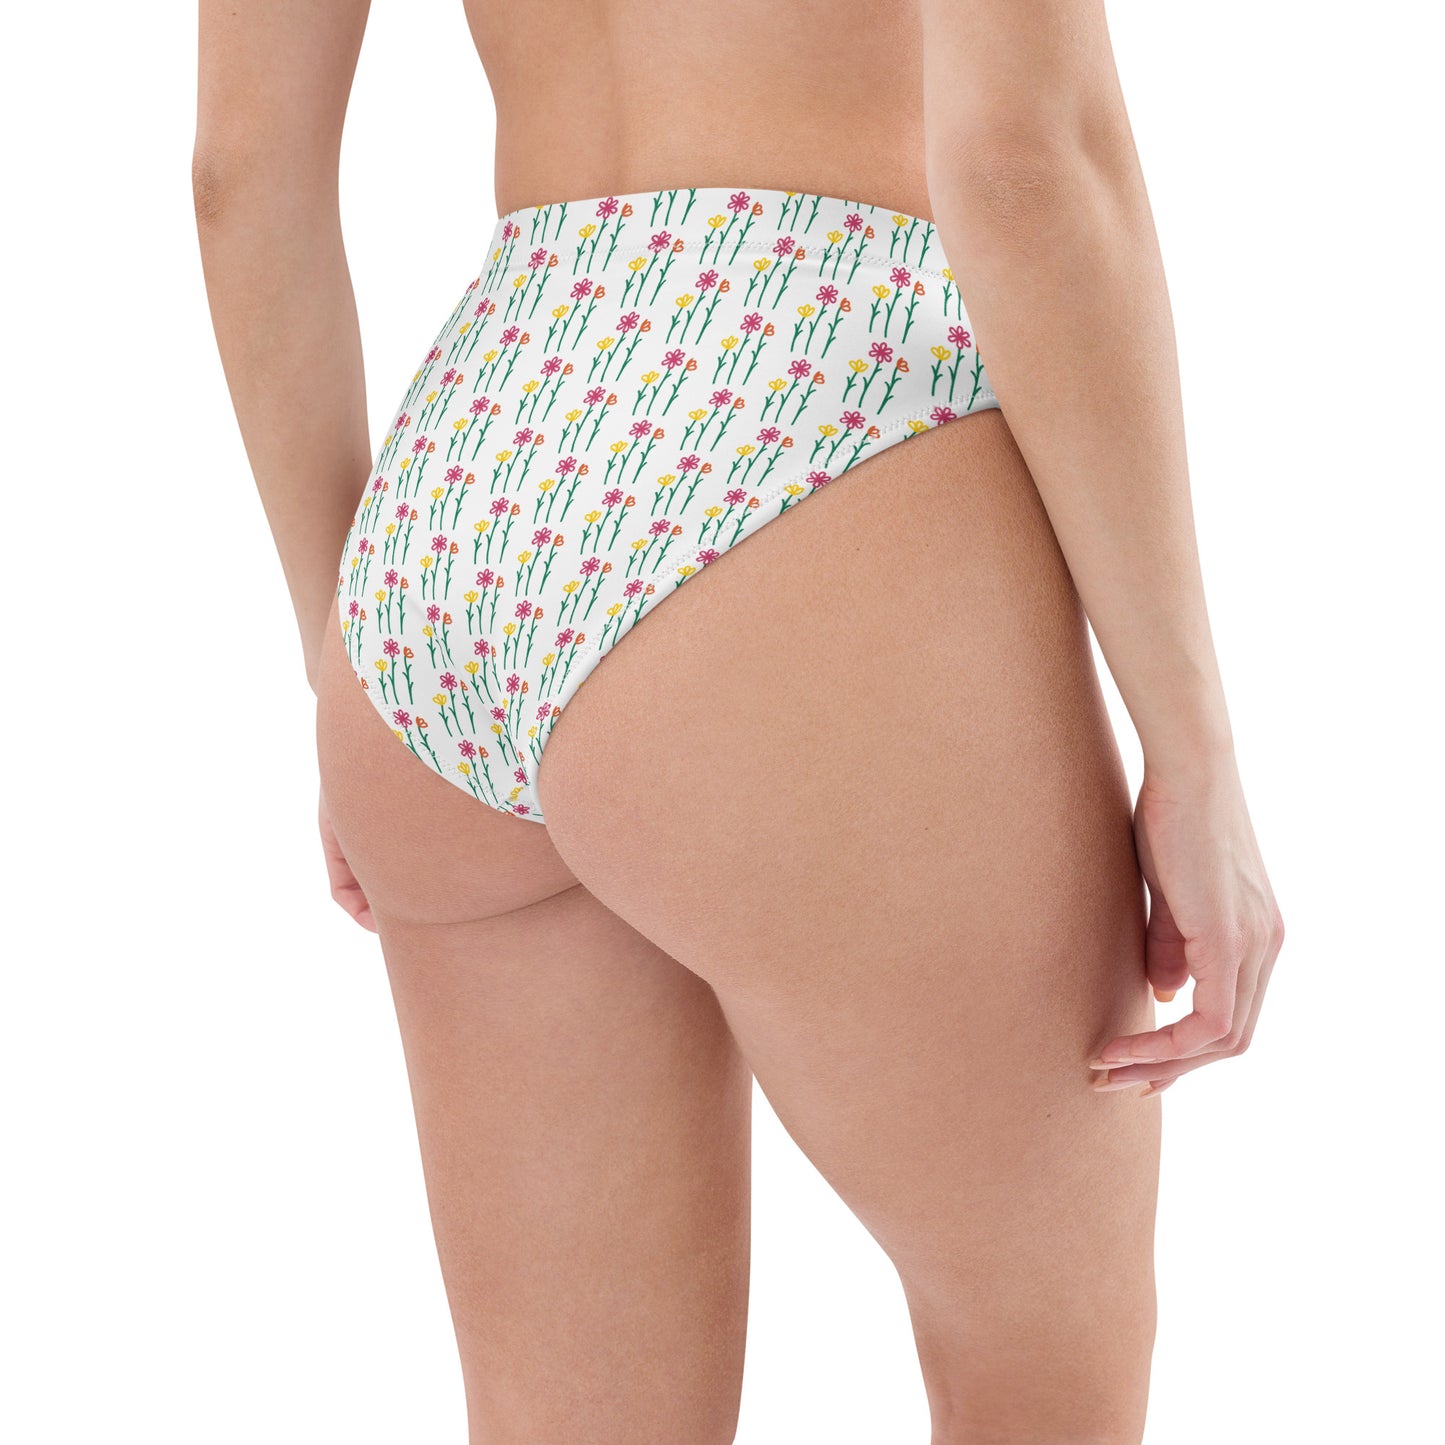 be yourself - recycled high-waisted bikini bottom by the banannie diaries